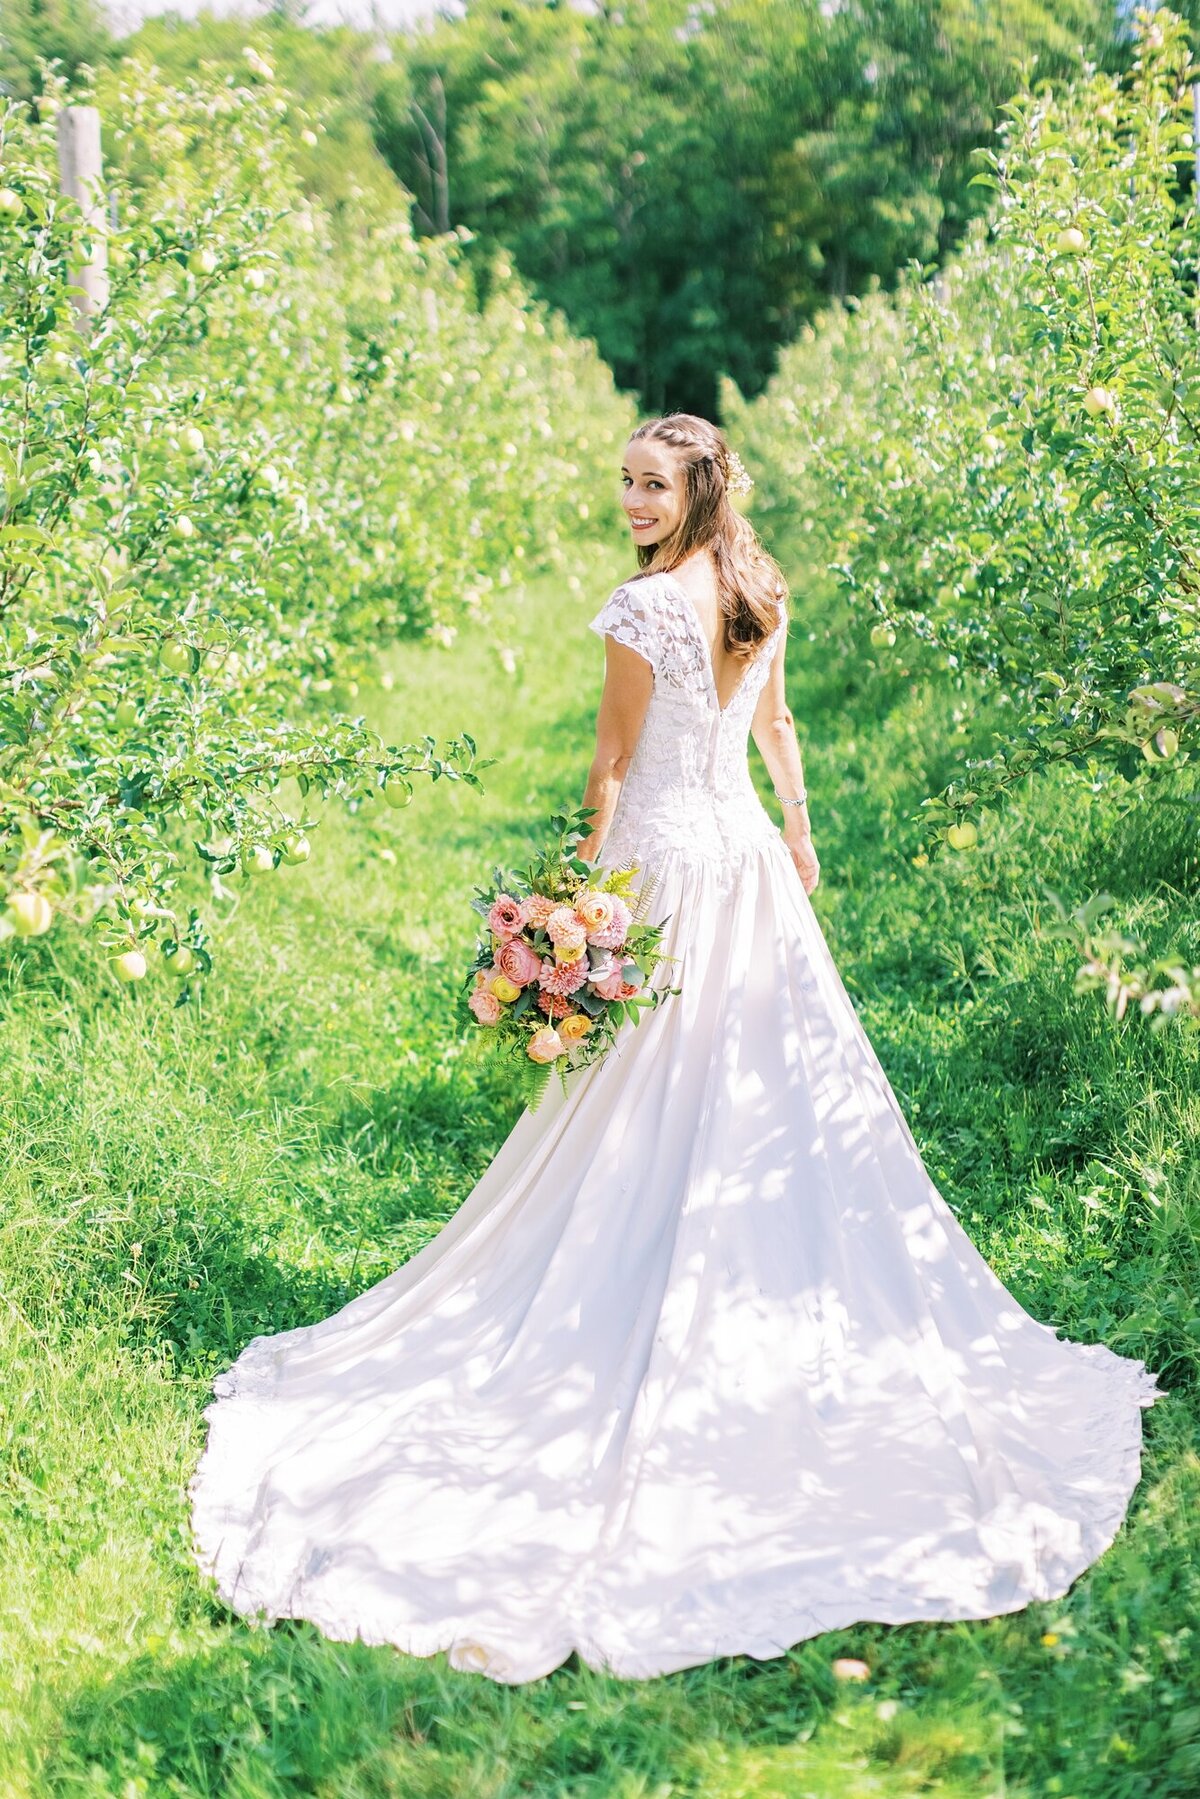 The-Greenery-Colorful-Apple-Orchard-NH-New-Hampshire-Wedding-Photography_0033